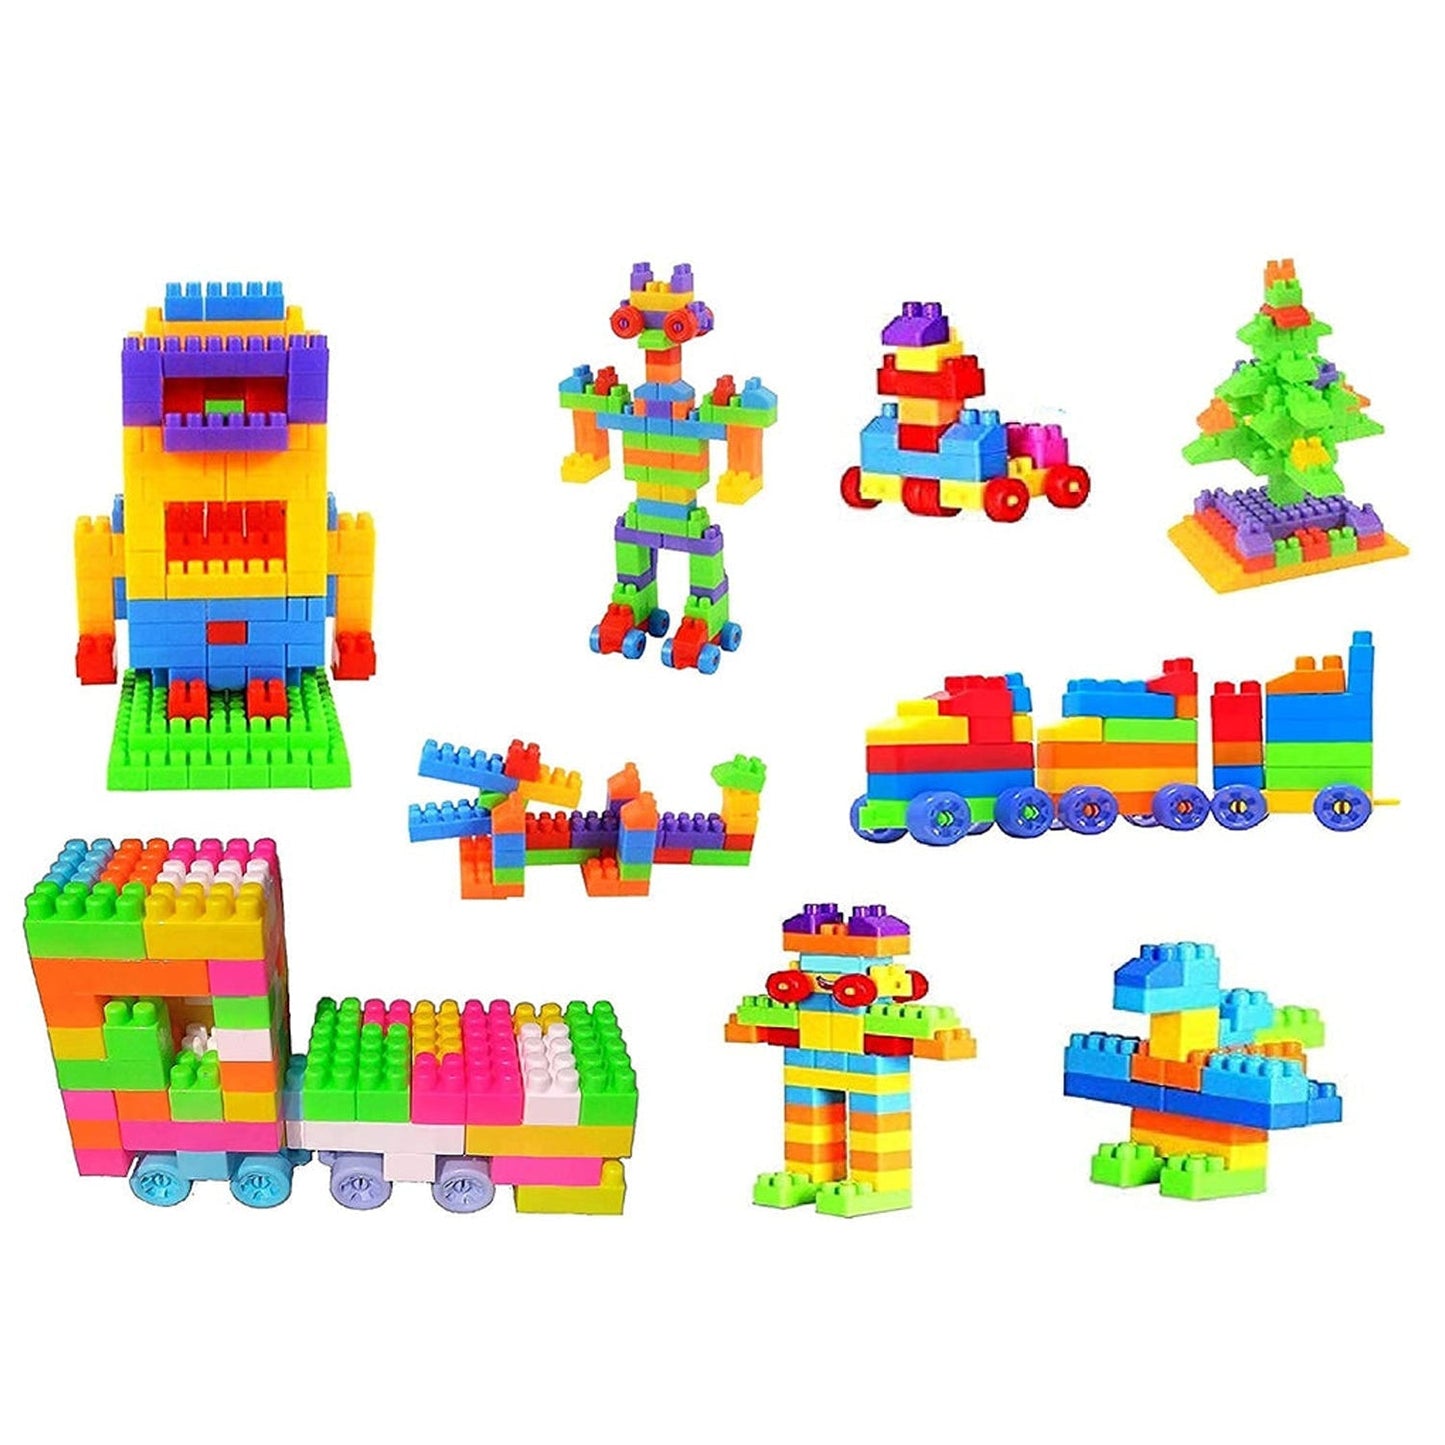 3914 100 Pc Train Blocks Toy used in all kinds of household and official places specially for kids and children for their playing and enjoying purposes.